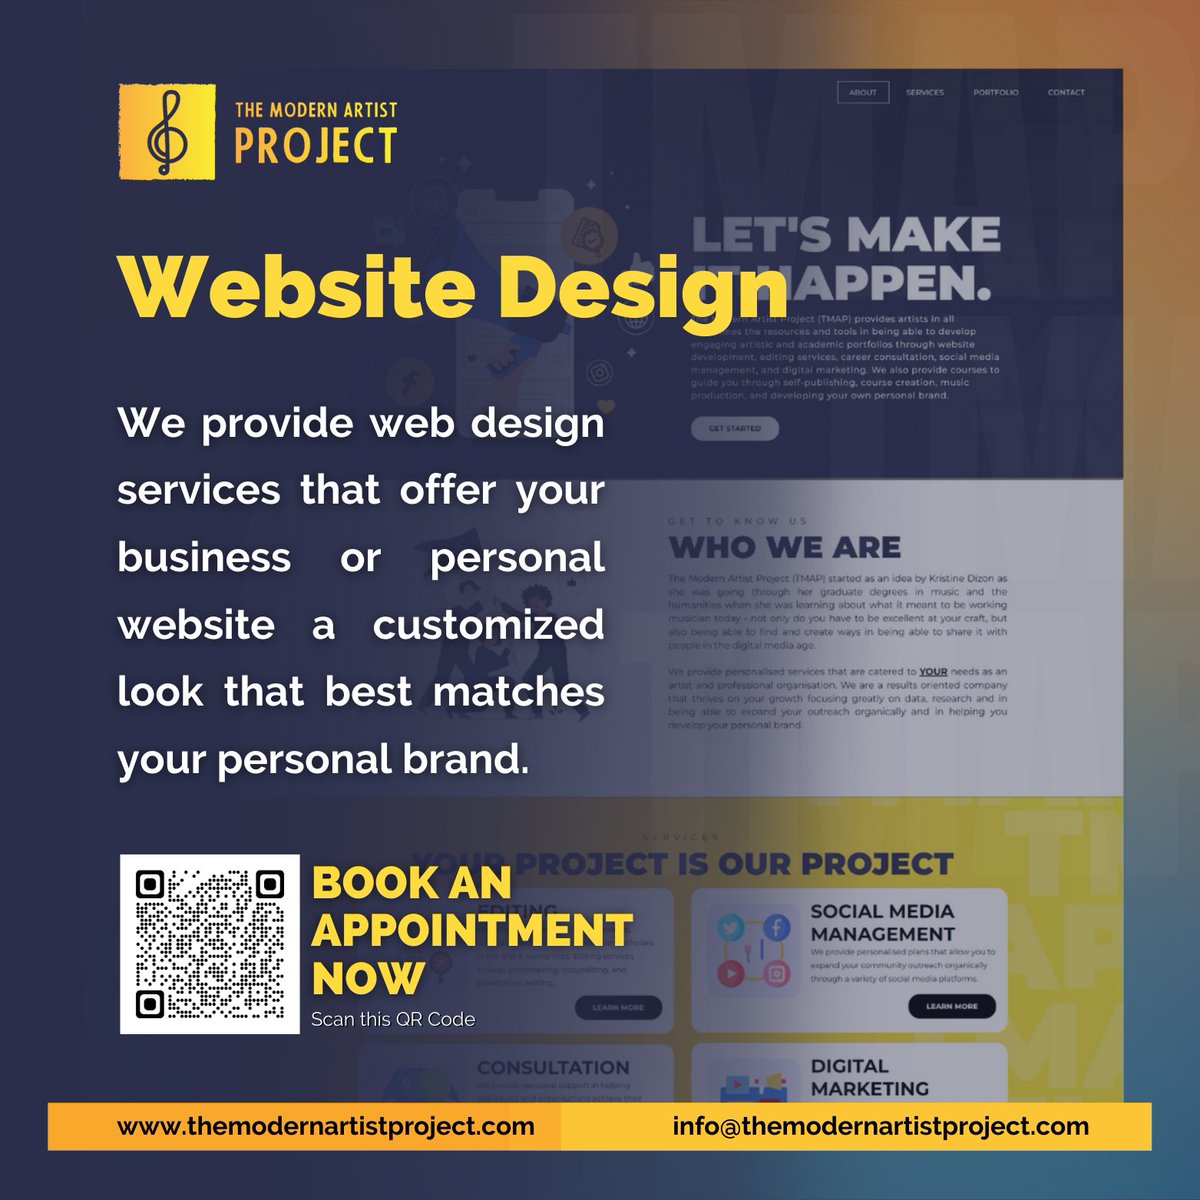 Get ready to showcase your art in a whole new way with a custom website from the Modern Artist Project. We're experts in designing websites for artists, and we can't wait to help you take your career to the next level. Contact us for ... #webdesign #artistwebsite #professionalism